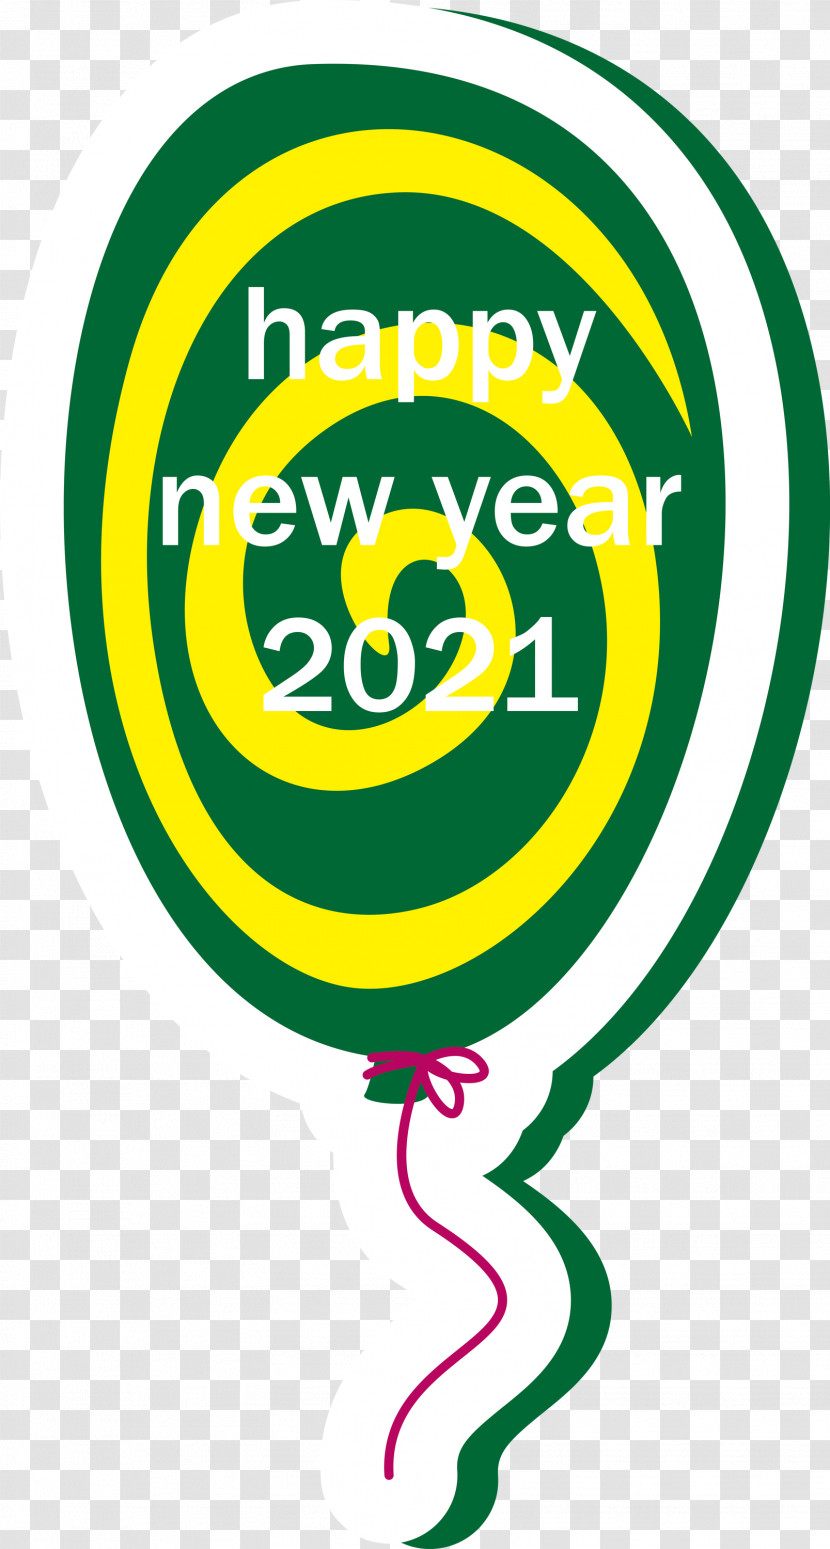 Balloon 2021 Happy New Year Transparent PNG